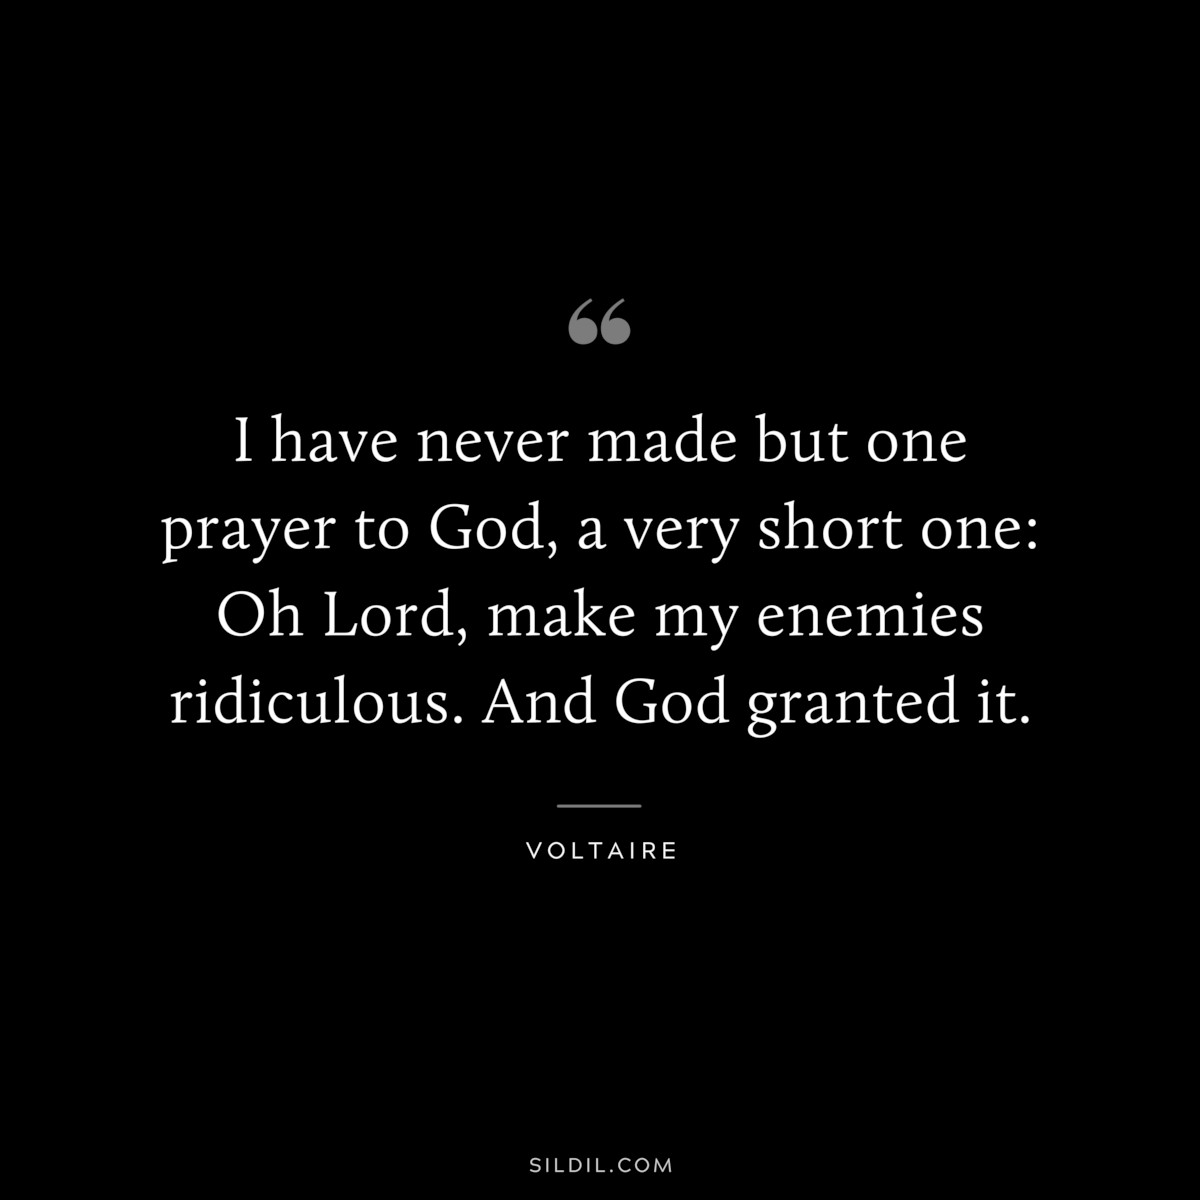 I have never made but one prayer to God, a very short one: Oh Lord, make my enemies ridiculous. And God granted it. ― Voltaire